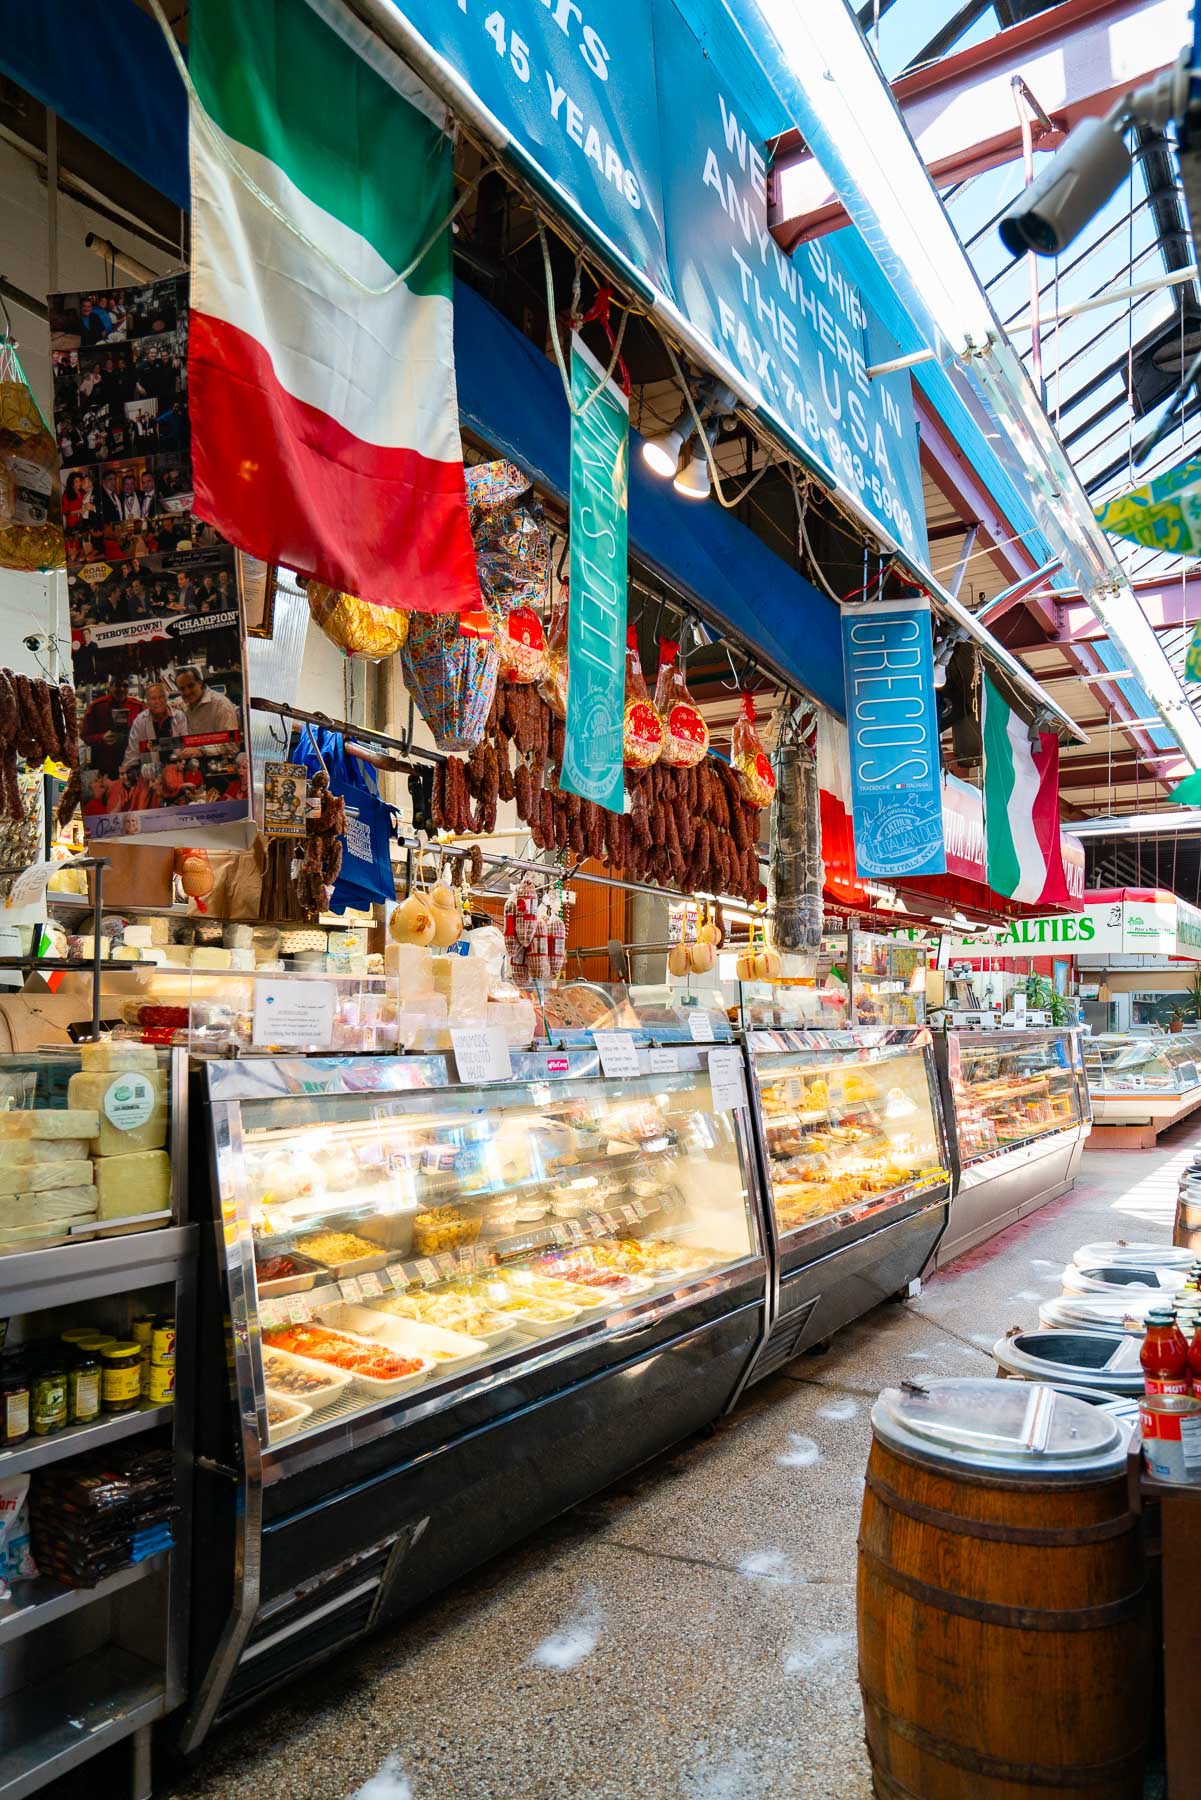 Meat and cheese counter at the Arthur Avenue Retail Market with Italian flags hanging from the ceilings and barrels of olives across the opposite end of the walkway